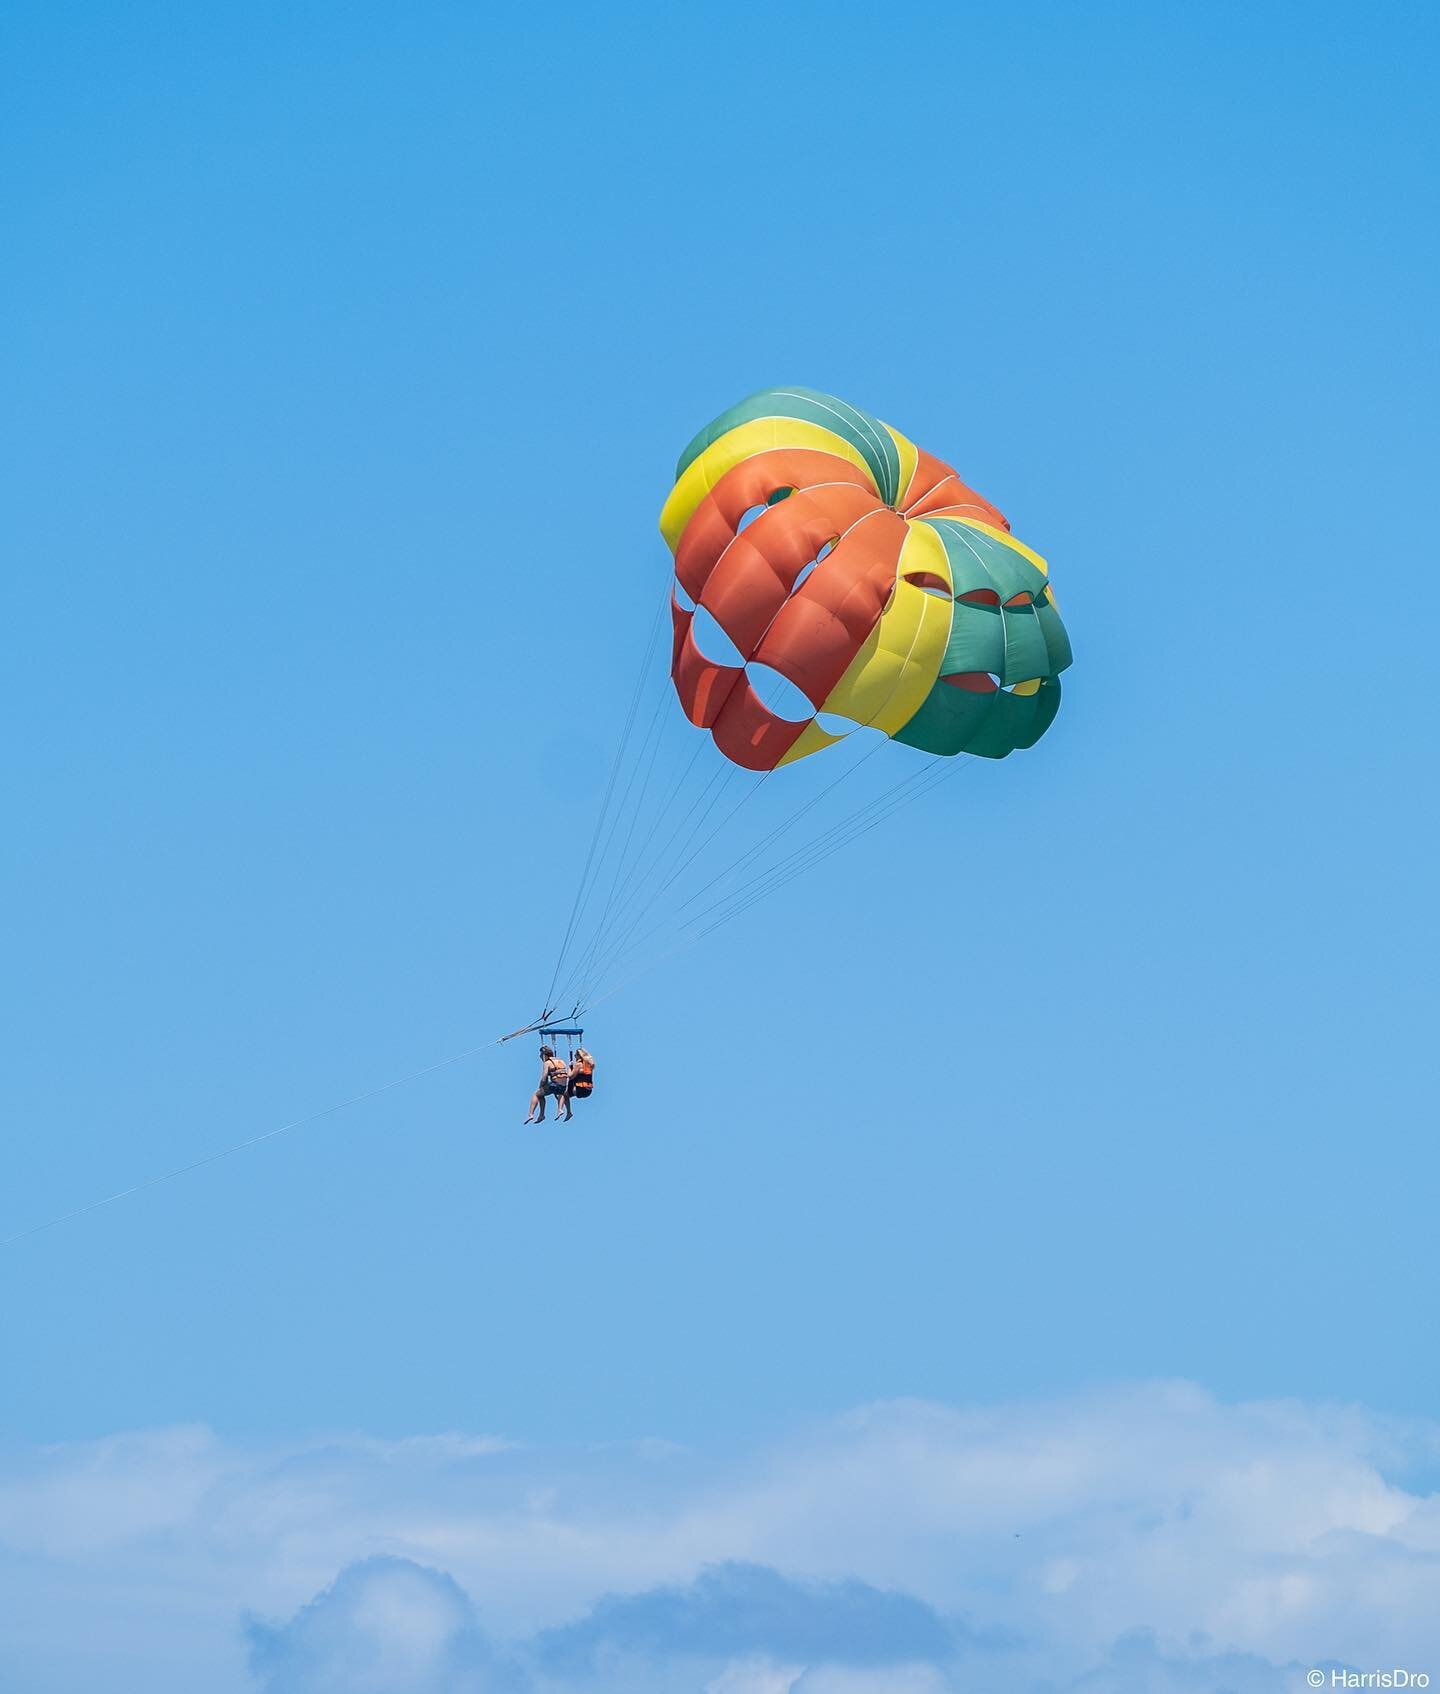 One of the best places to try parasailing is for sure Mexico! Enjoying the views of Playa del Carmen should be in your bucket list. #mexico #parasailing #parasailingadventure #flying #watersports #playadelcarmen #visitmexico #visitmexico🇲🇽 #zoomlen